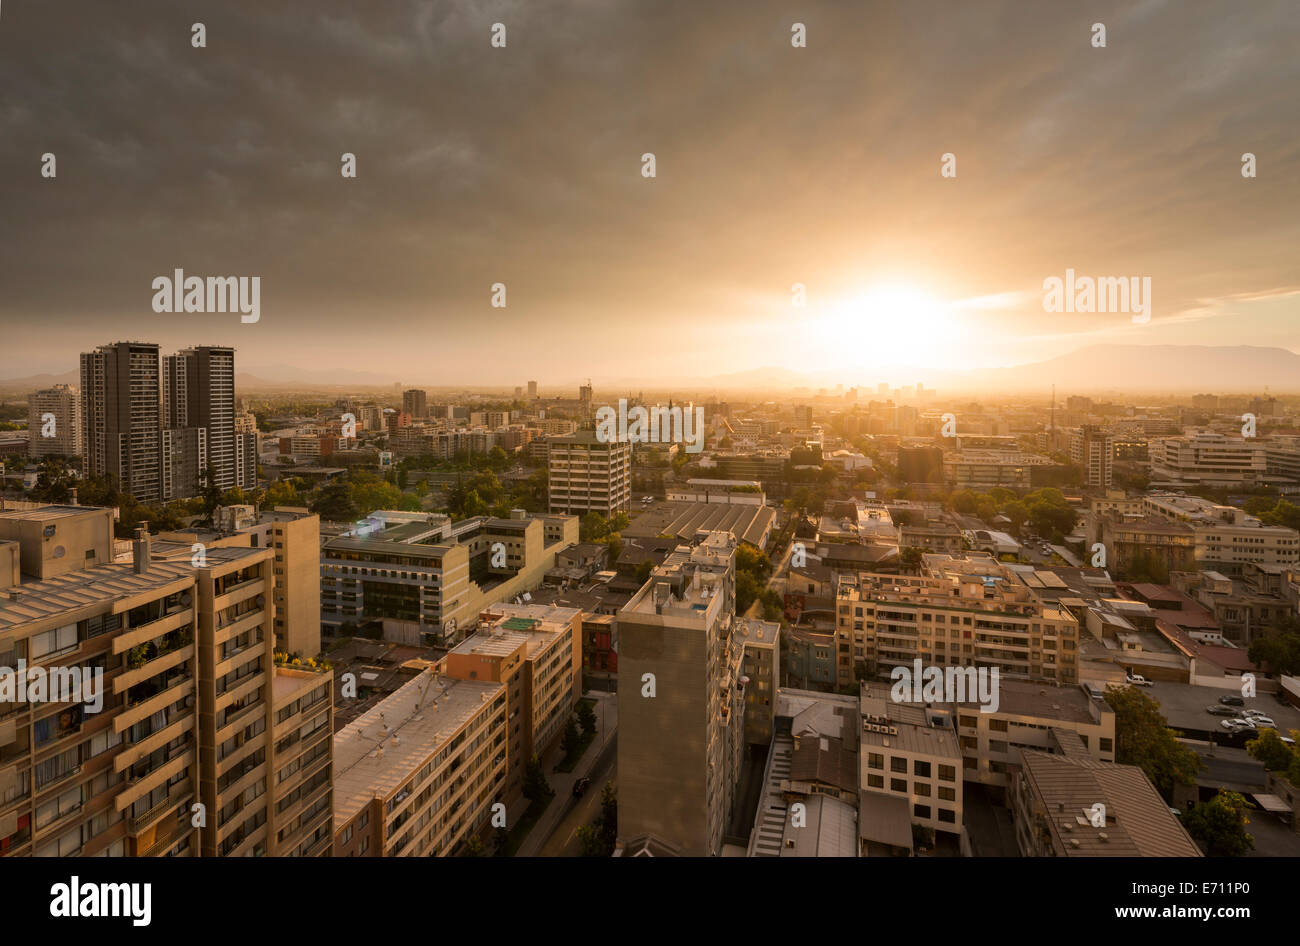 Aerial view of Santiago city at sunset, Chile Stock Photo